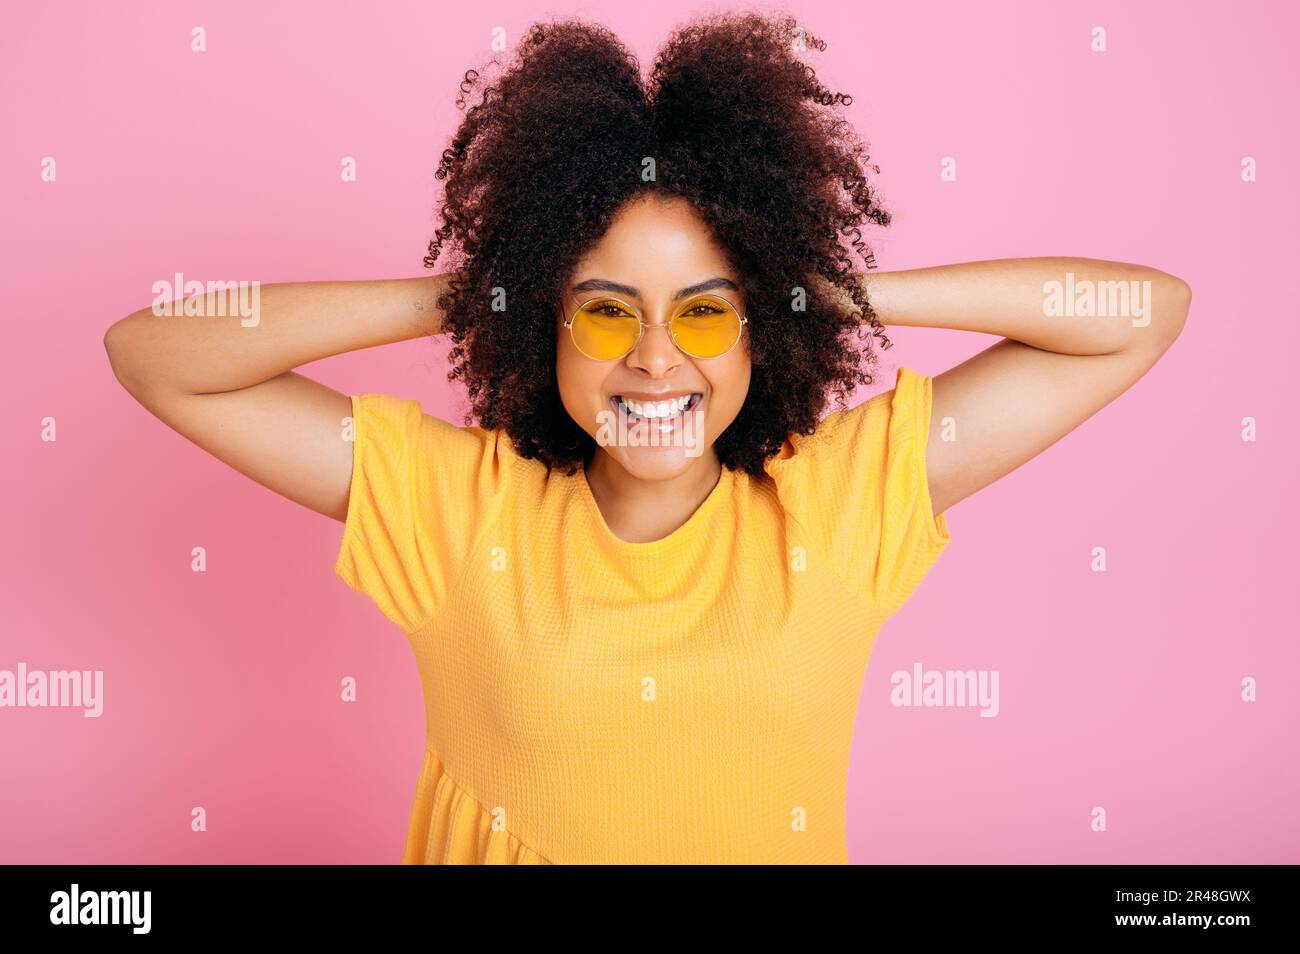 Joyful happy excited brazilian or hispanic curly young woman in trendy orange glasses and sundress, having fun, posing, holding hands on hair, looking at camera, smiling, isolated pink background Stock Photo